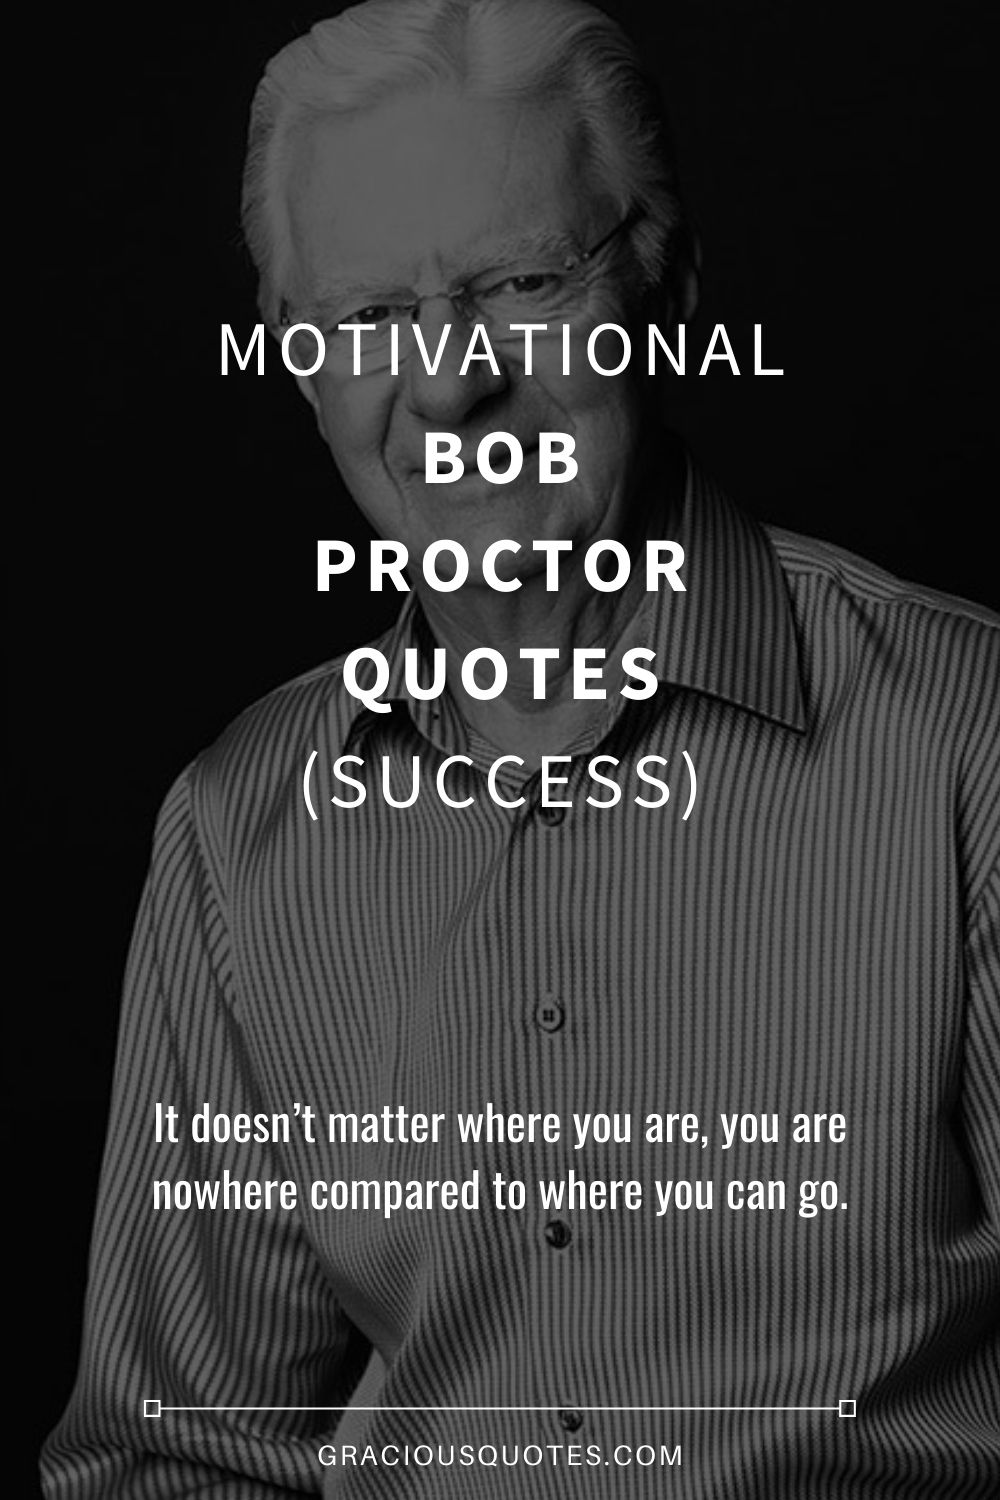 10 Life-Changing Bob Proctor Quotes for Success